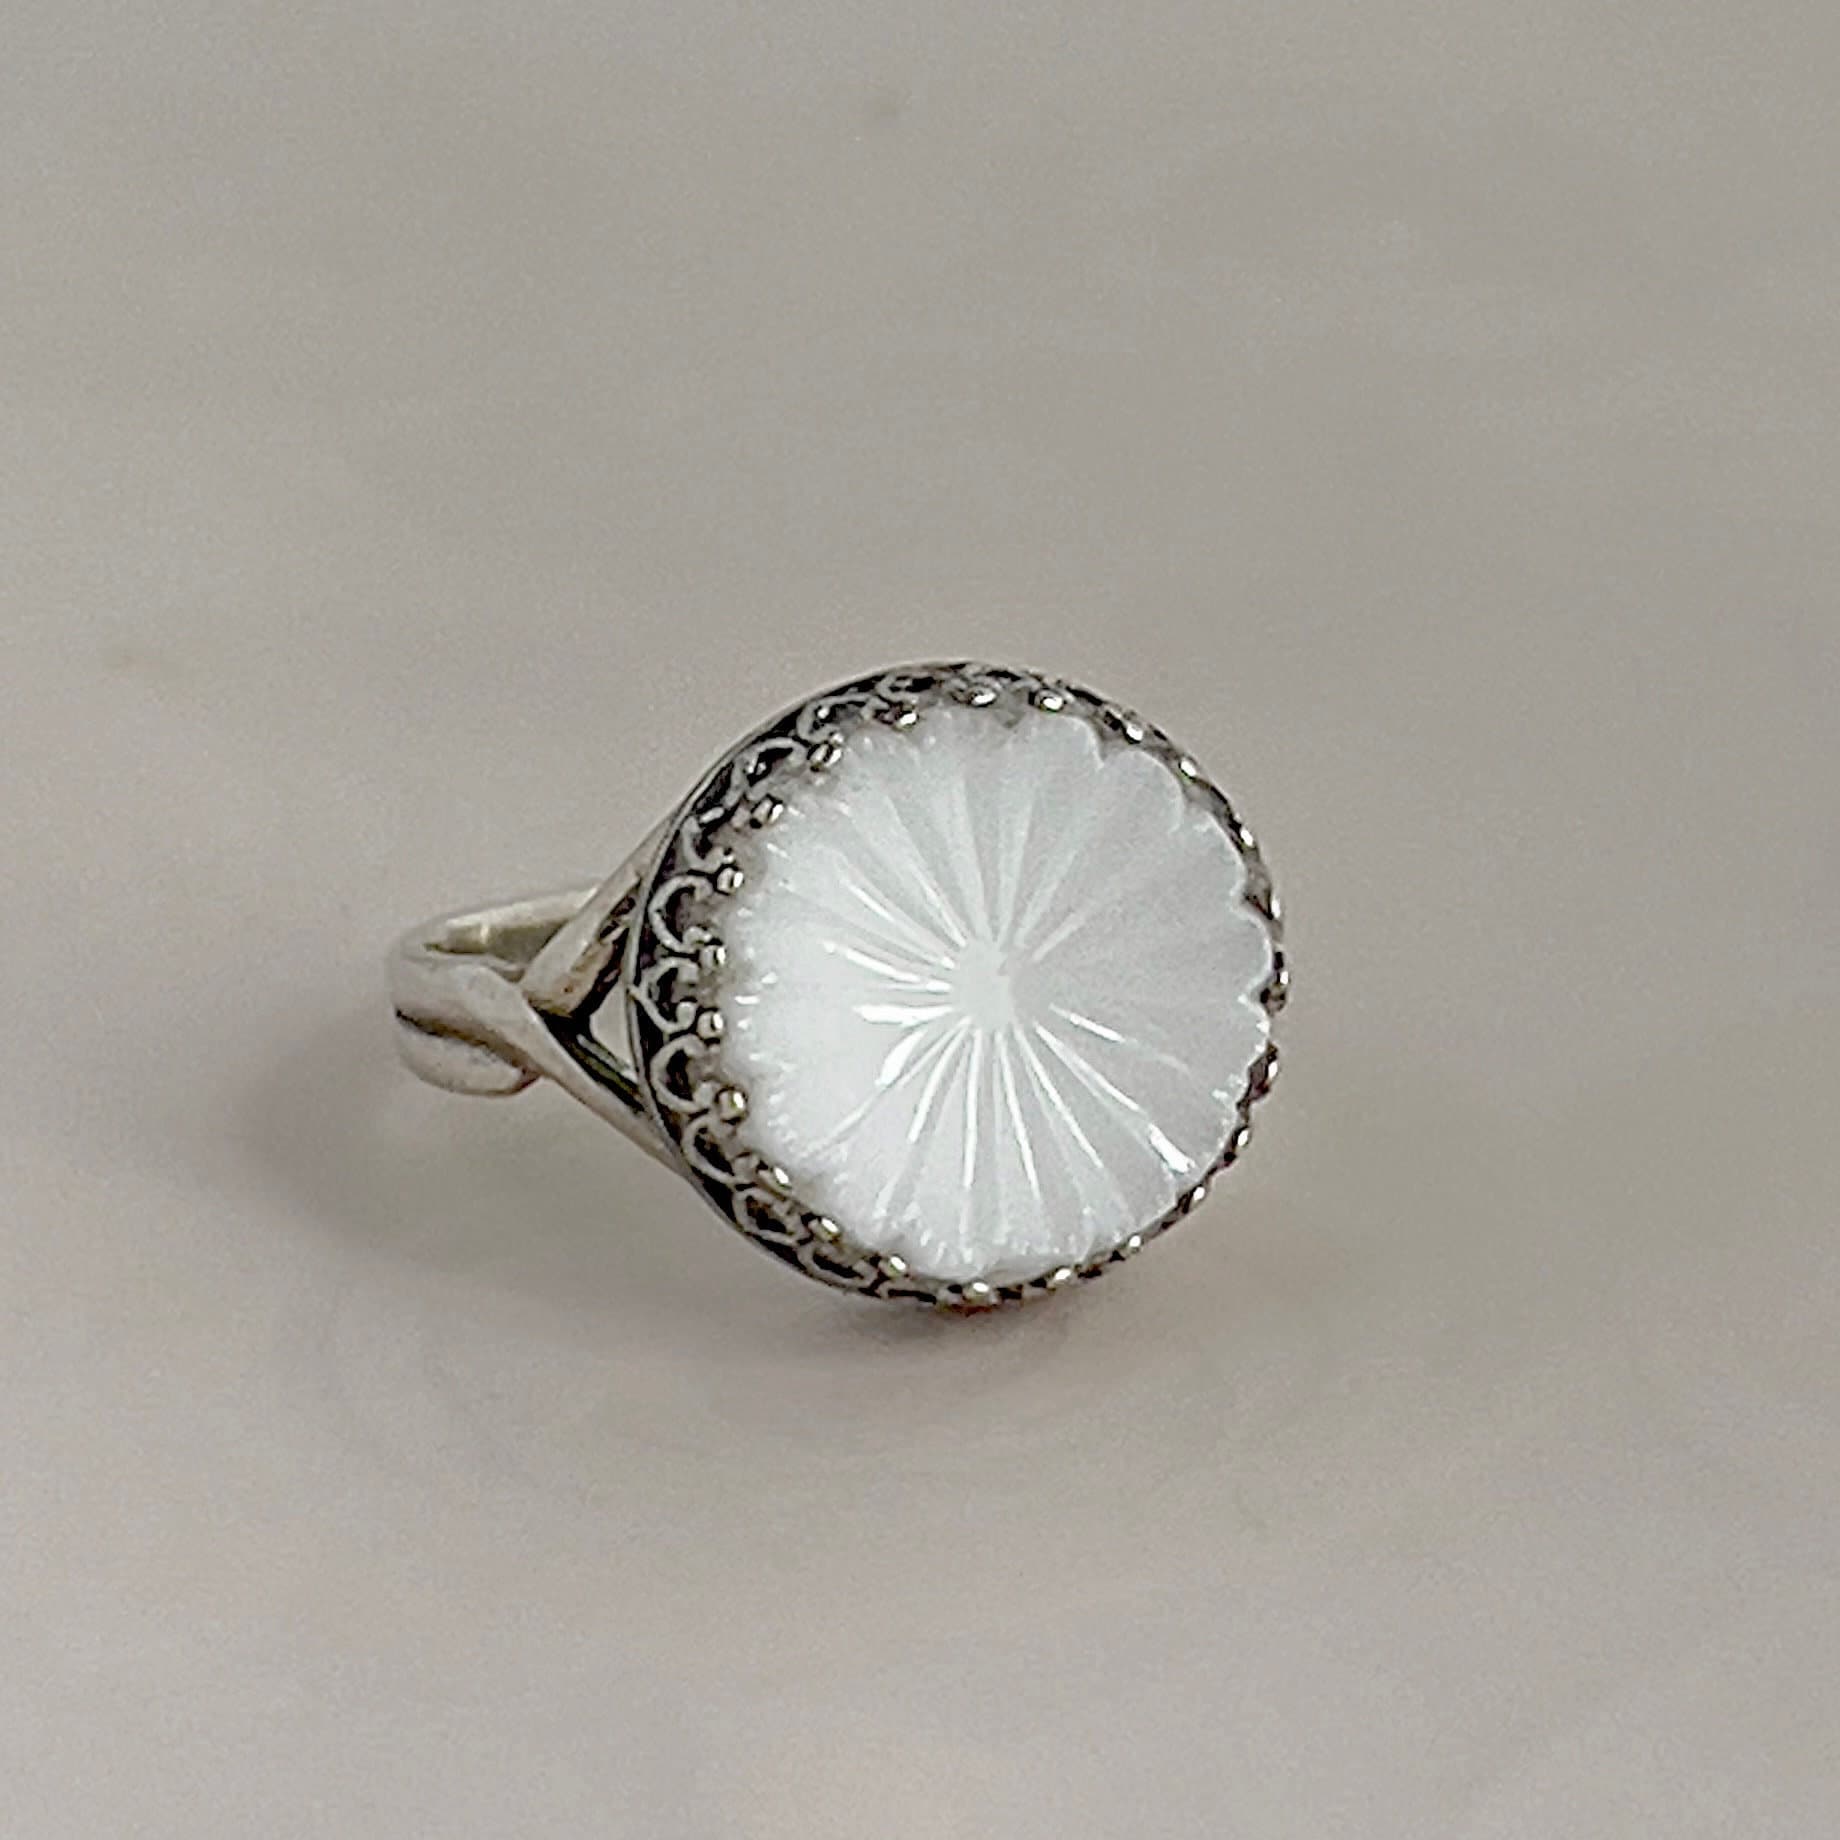 Vintage White Milk Glass Button Ring, Button Jewelry, Unique Gifts for Women, Sterling Silver Adjustable Ring